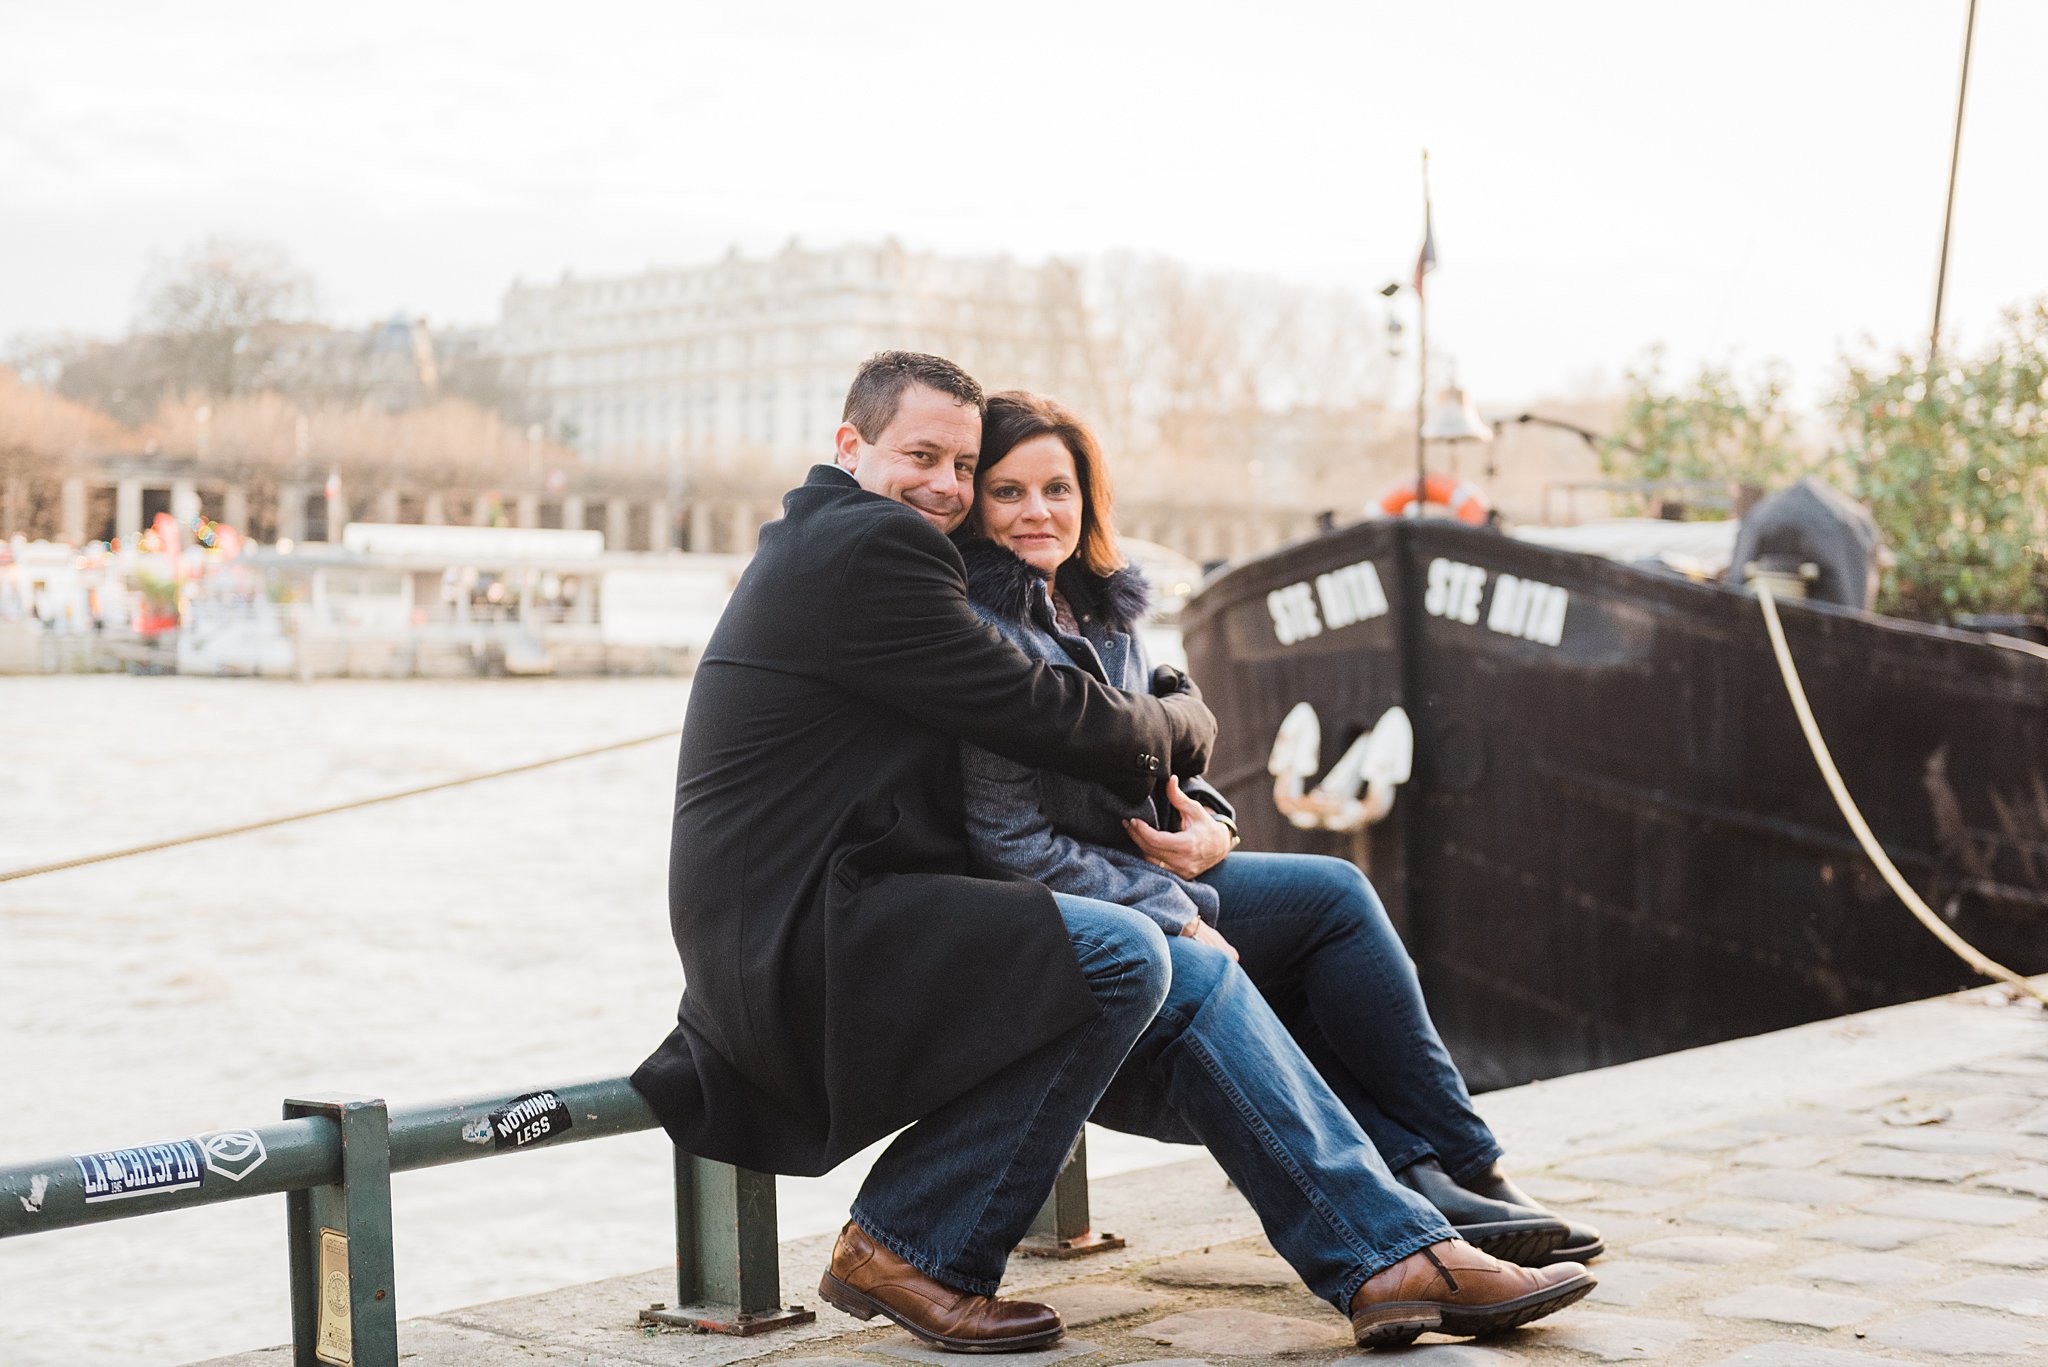 25th anniversary couples photography session by the seine river in Paris, France